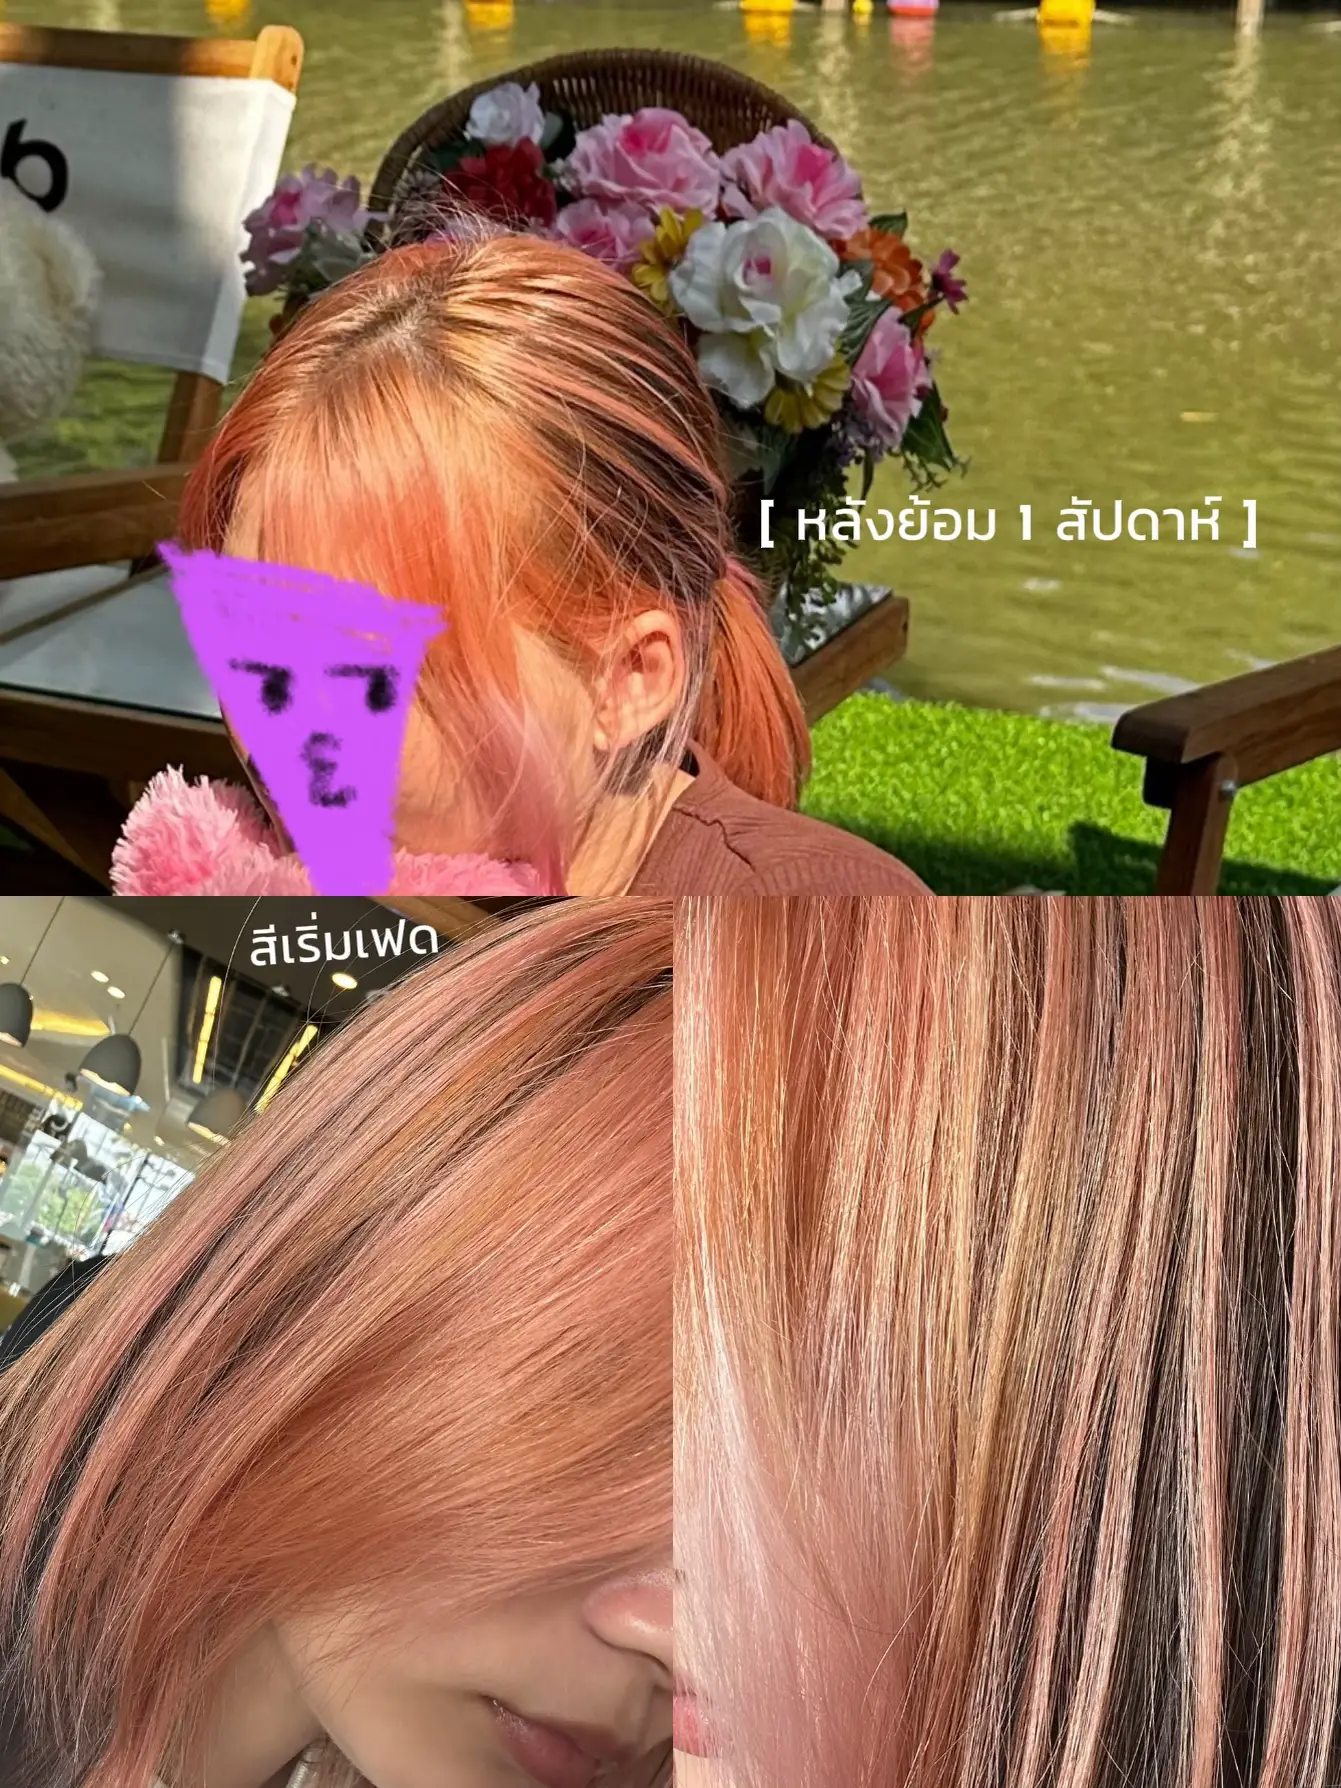 Have faded pink hair? Try out Narwhal for your next look 💕 #pinkhair , bleaching box dyed hair